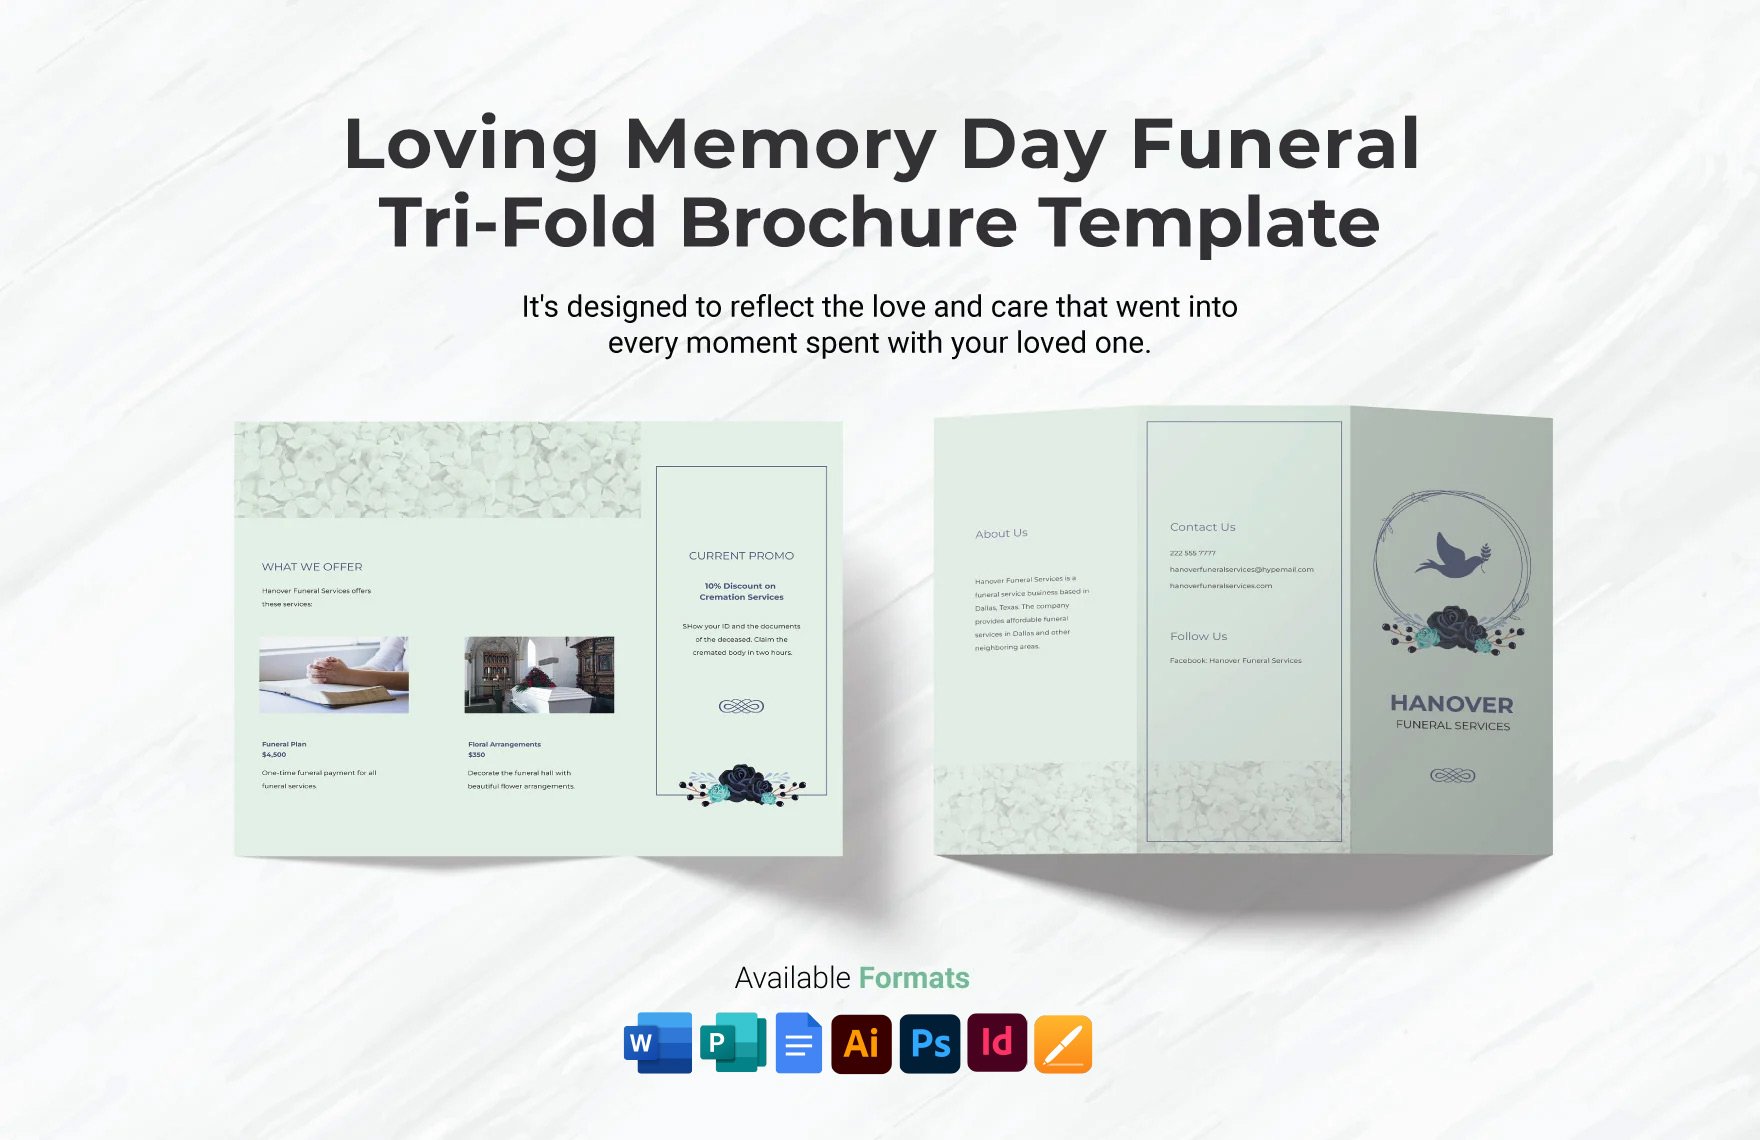 Free Loving Memory Day Funeral Tri-Fold Brochure Template in Word, Google Docs, Illustrator, PSD, Apple Pages, Publisher, InDesign